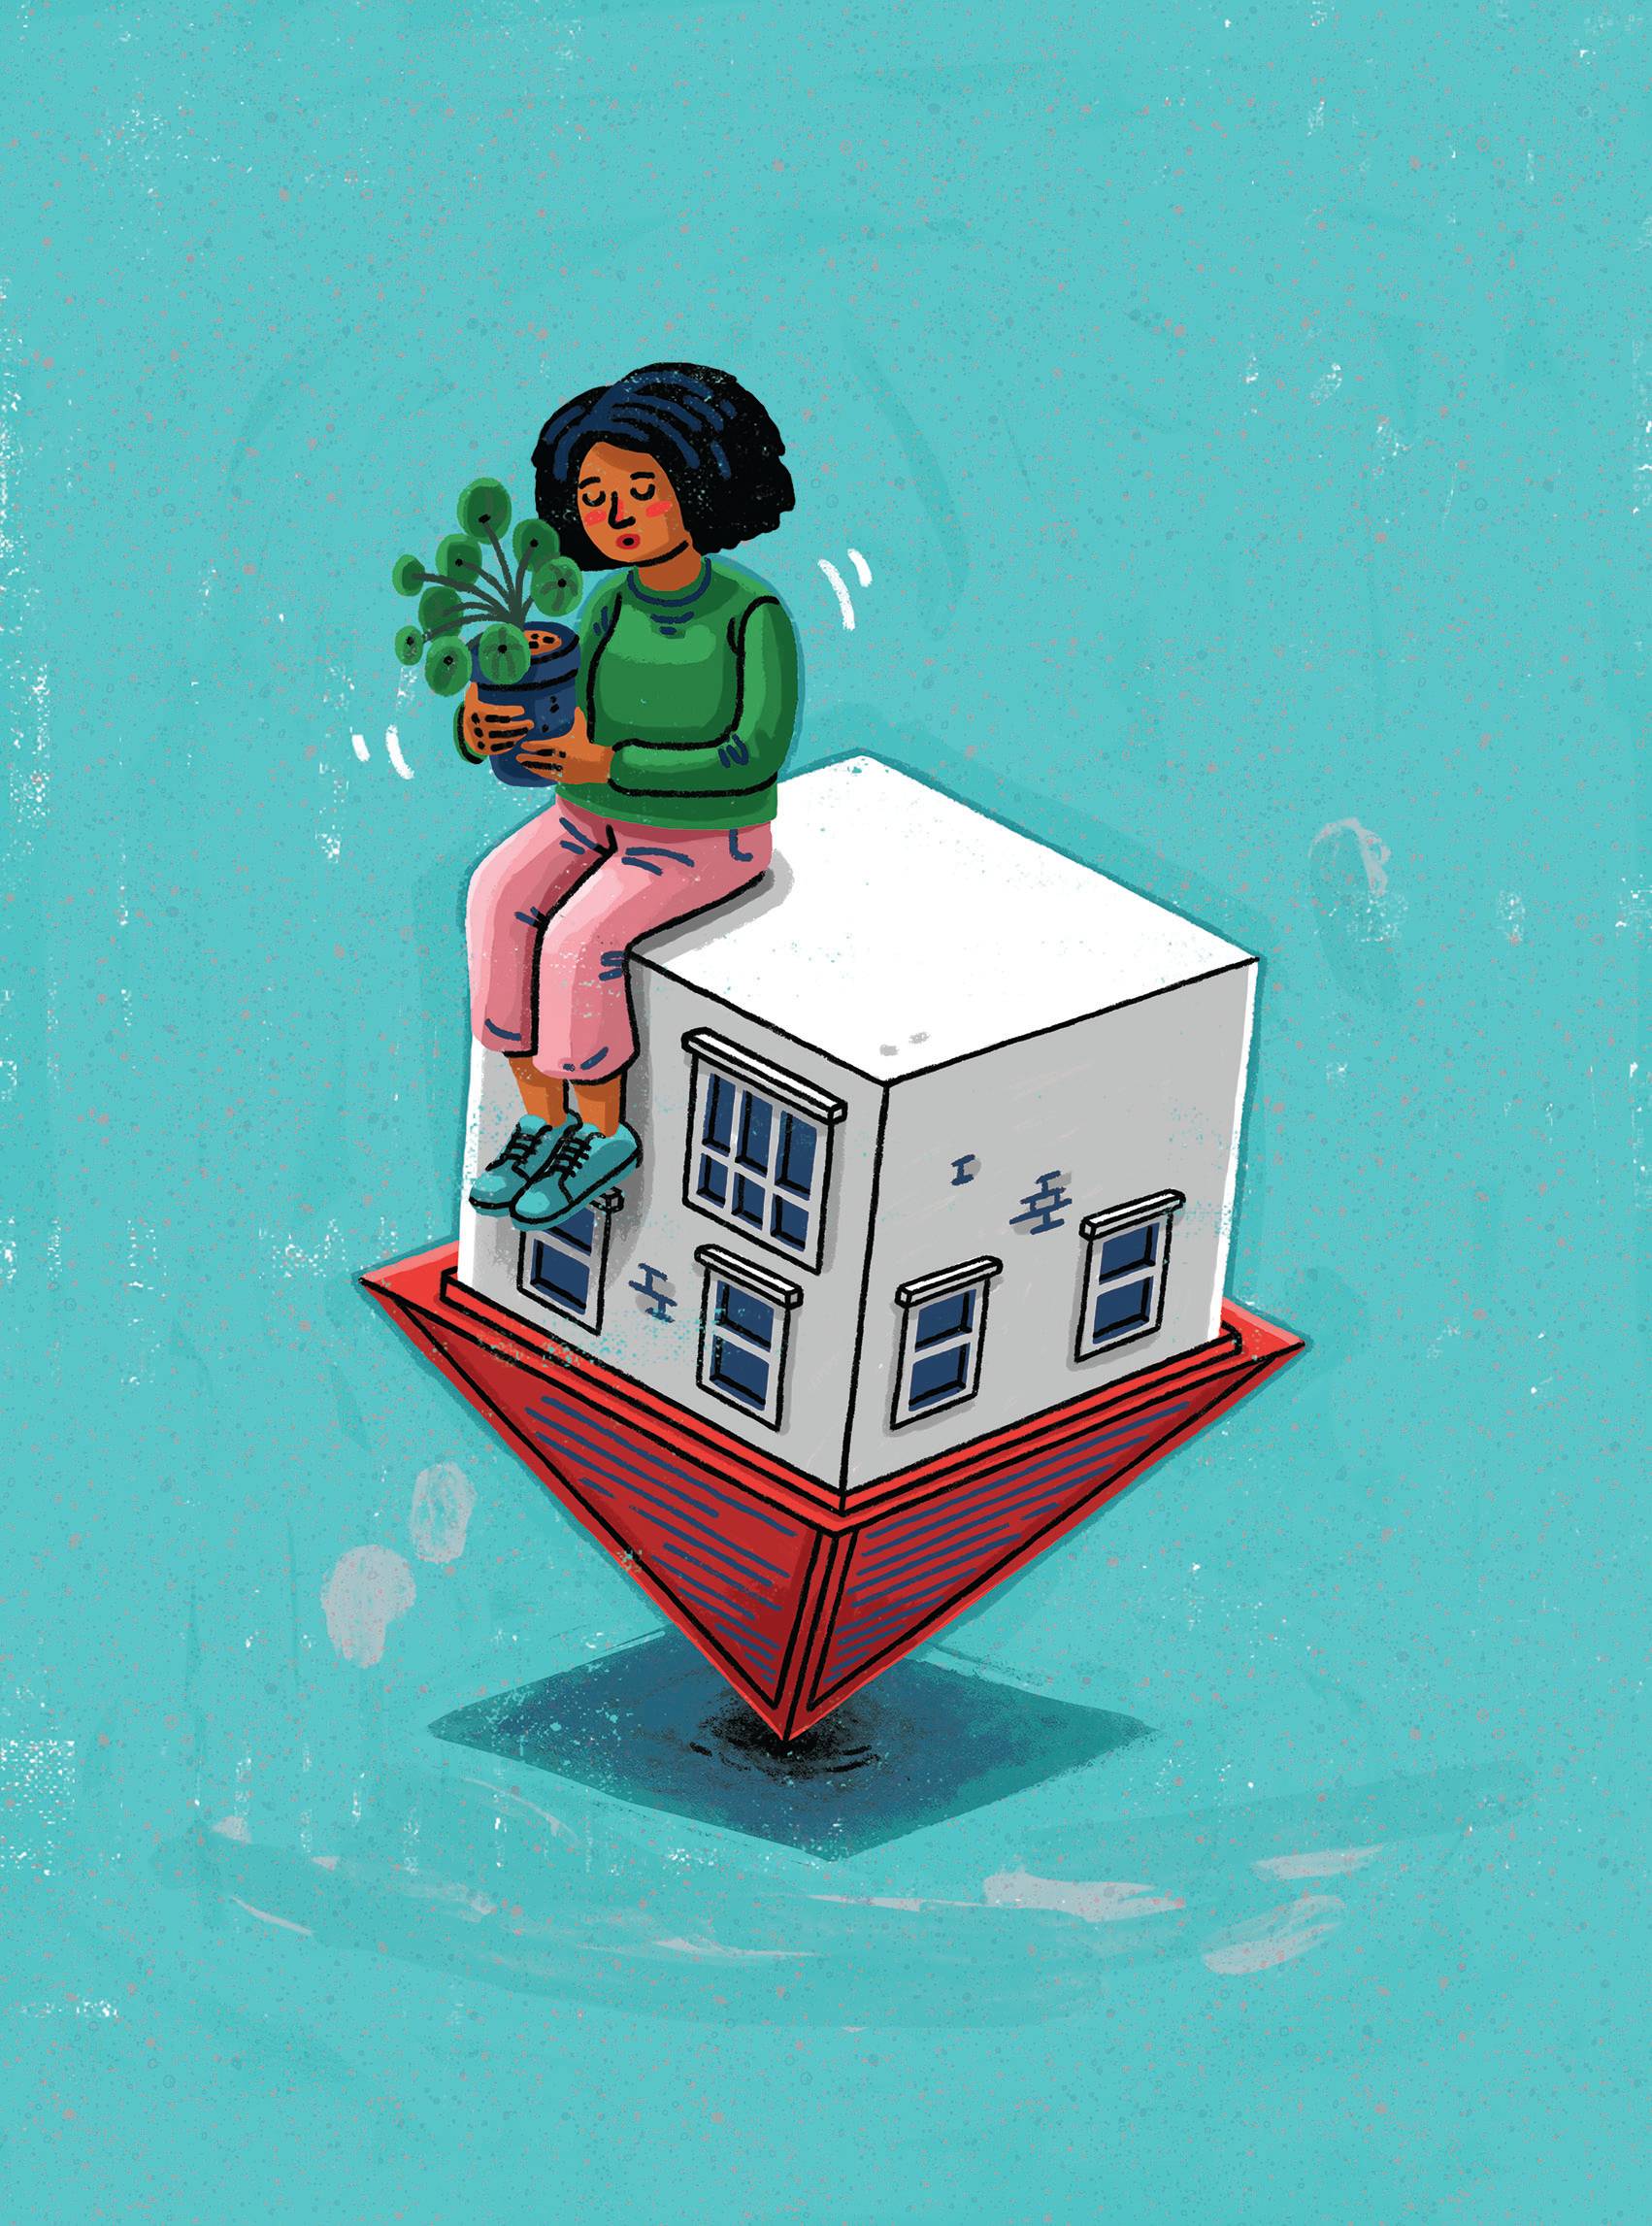 Illustration of a woman holding a plant pot solemnly on top of an upside down house